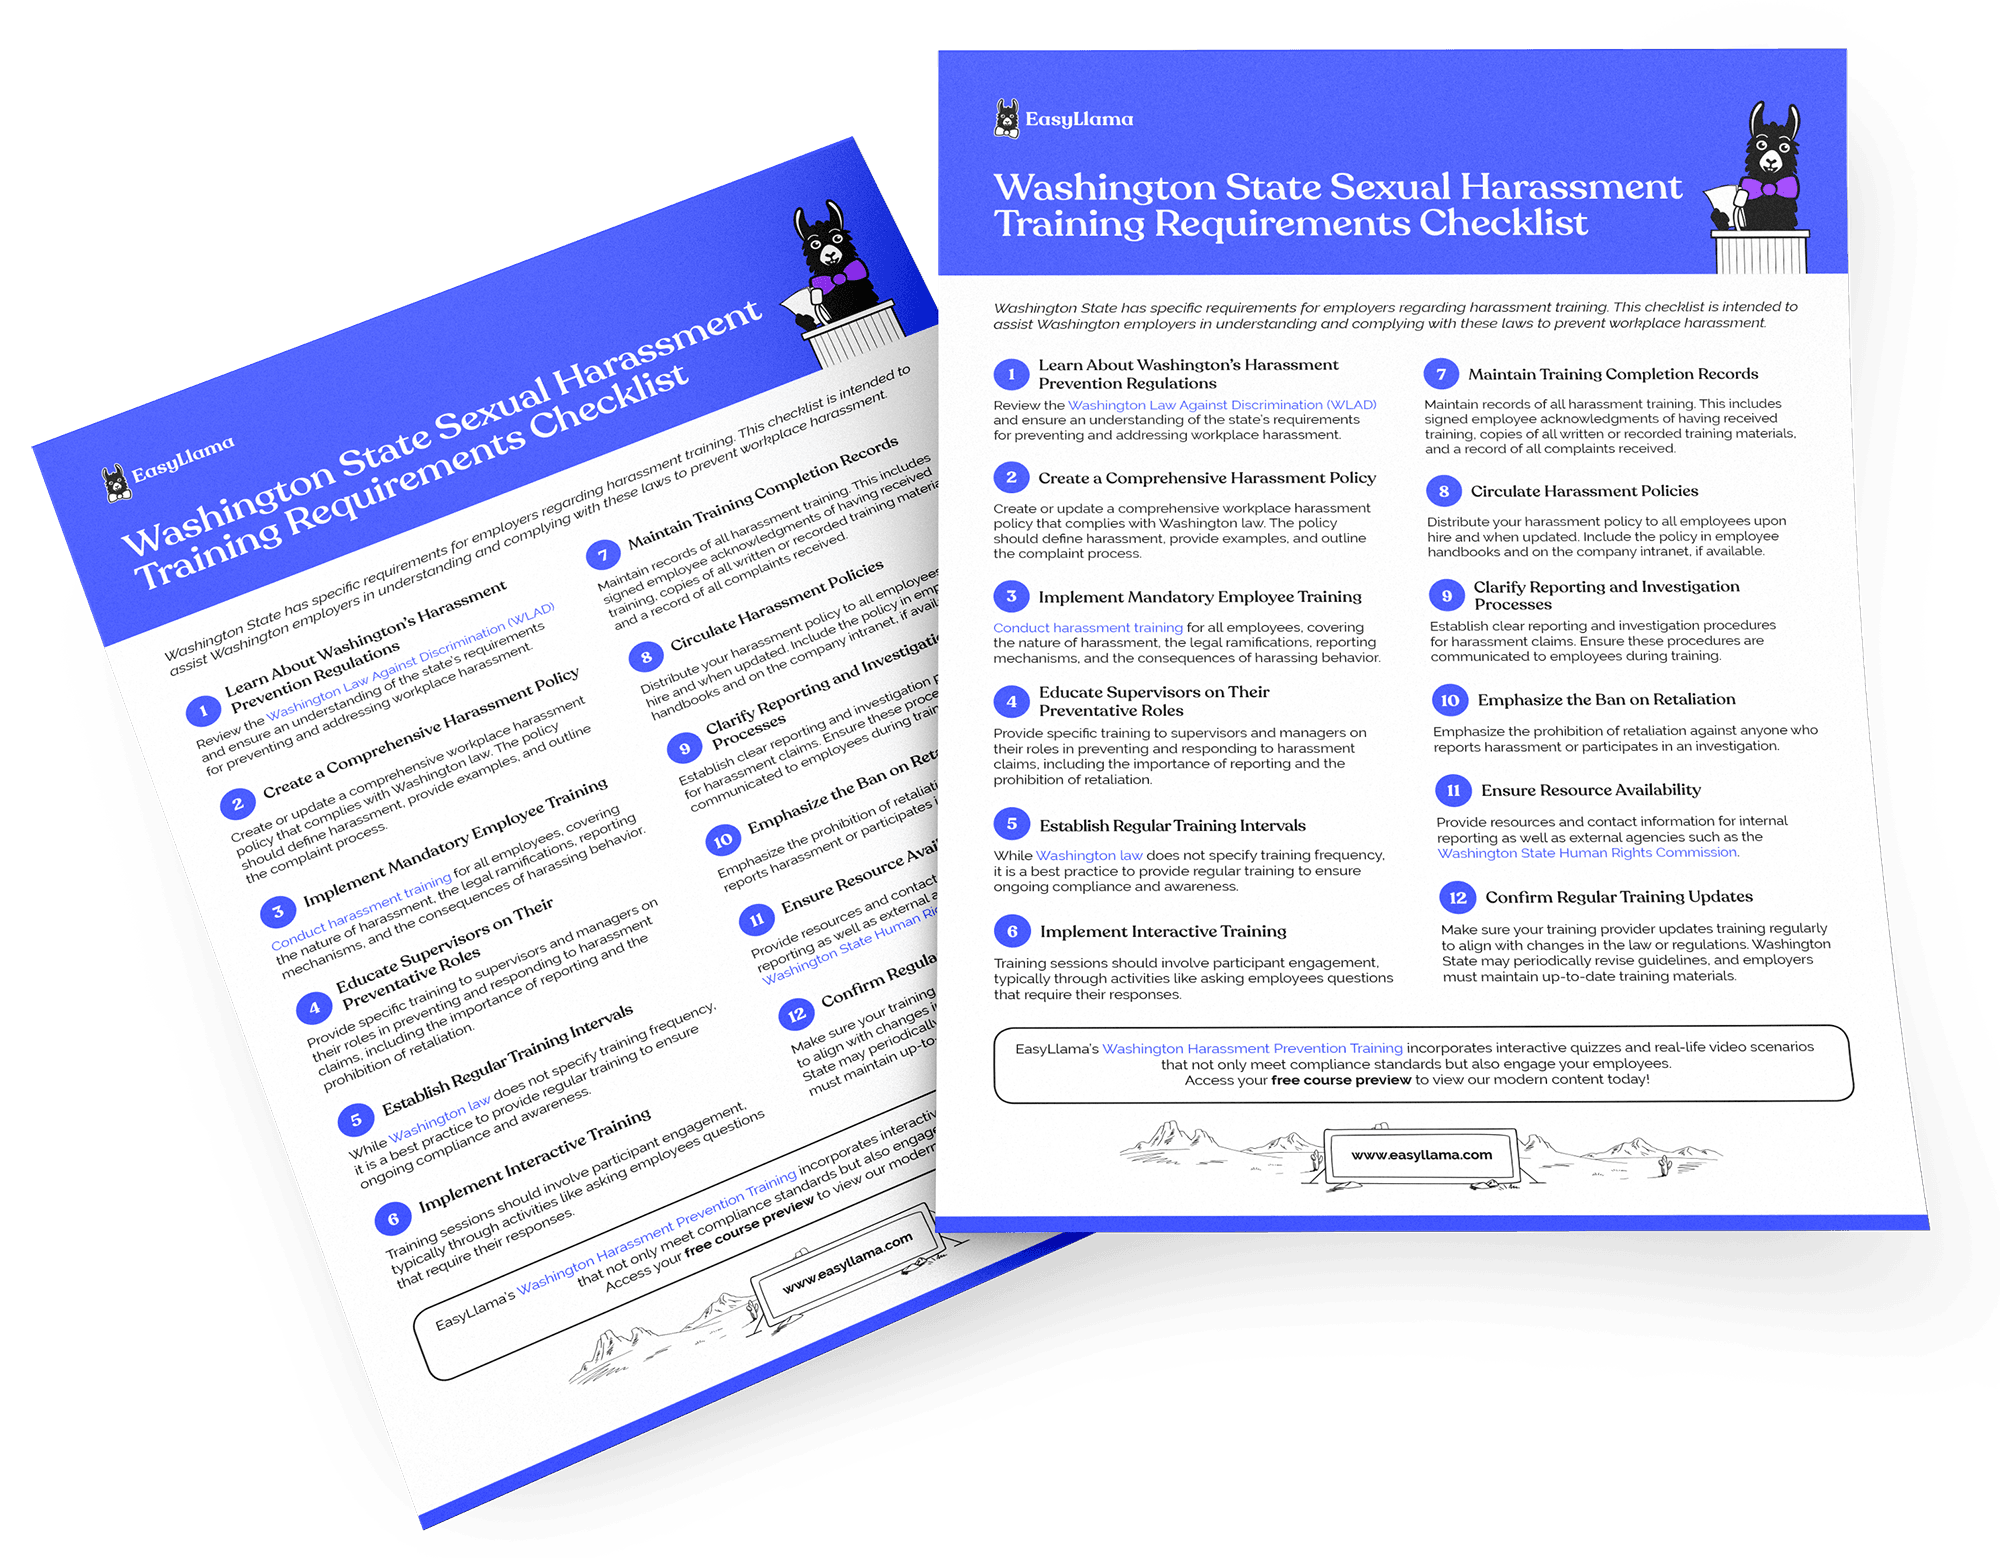 Washington State Sexual Harassment Training Requirements Checklist